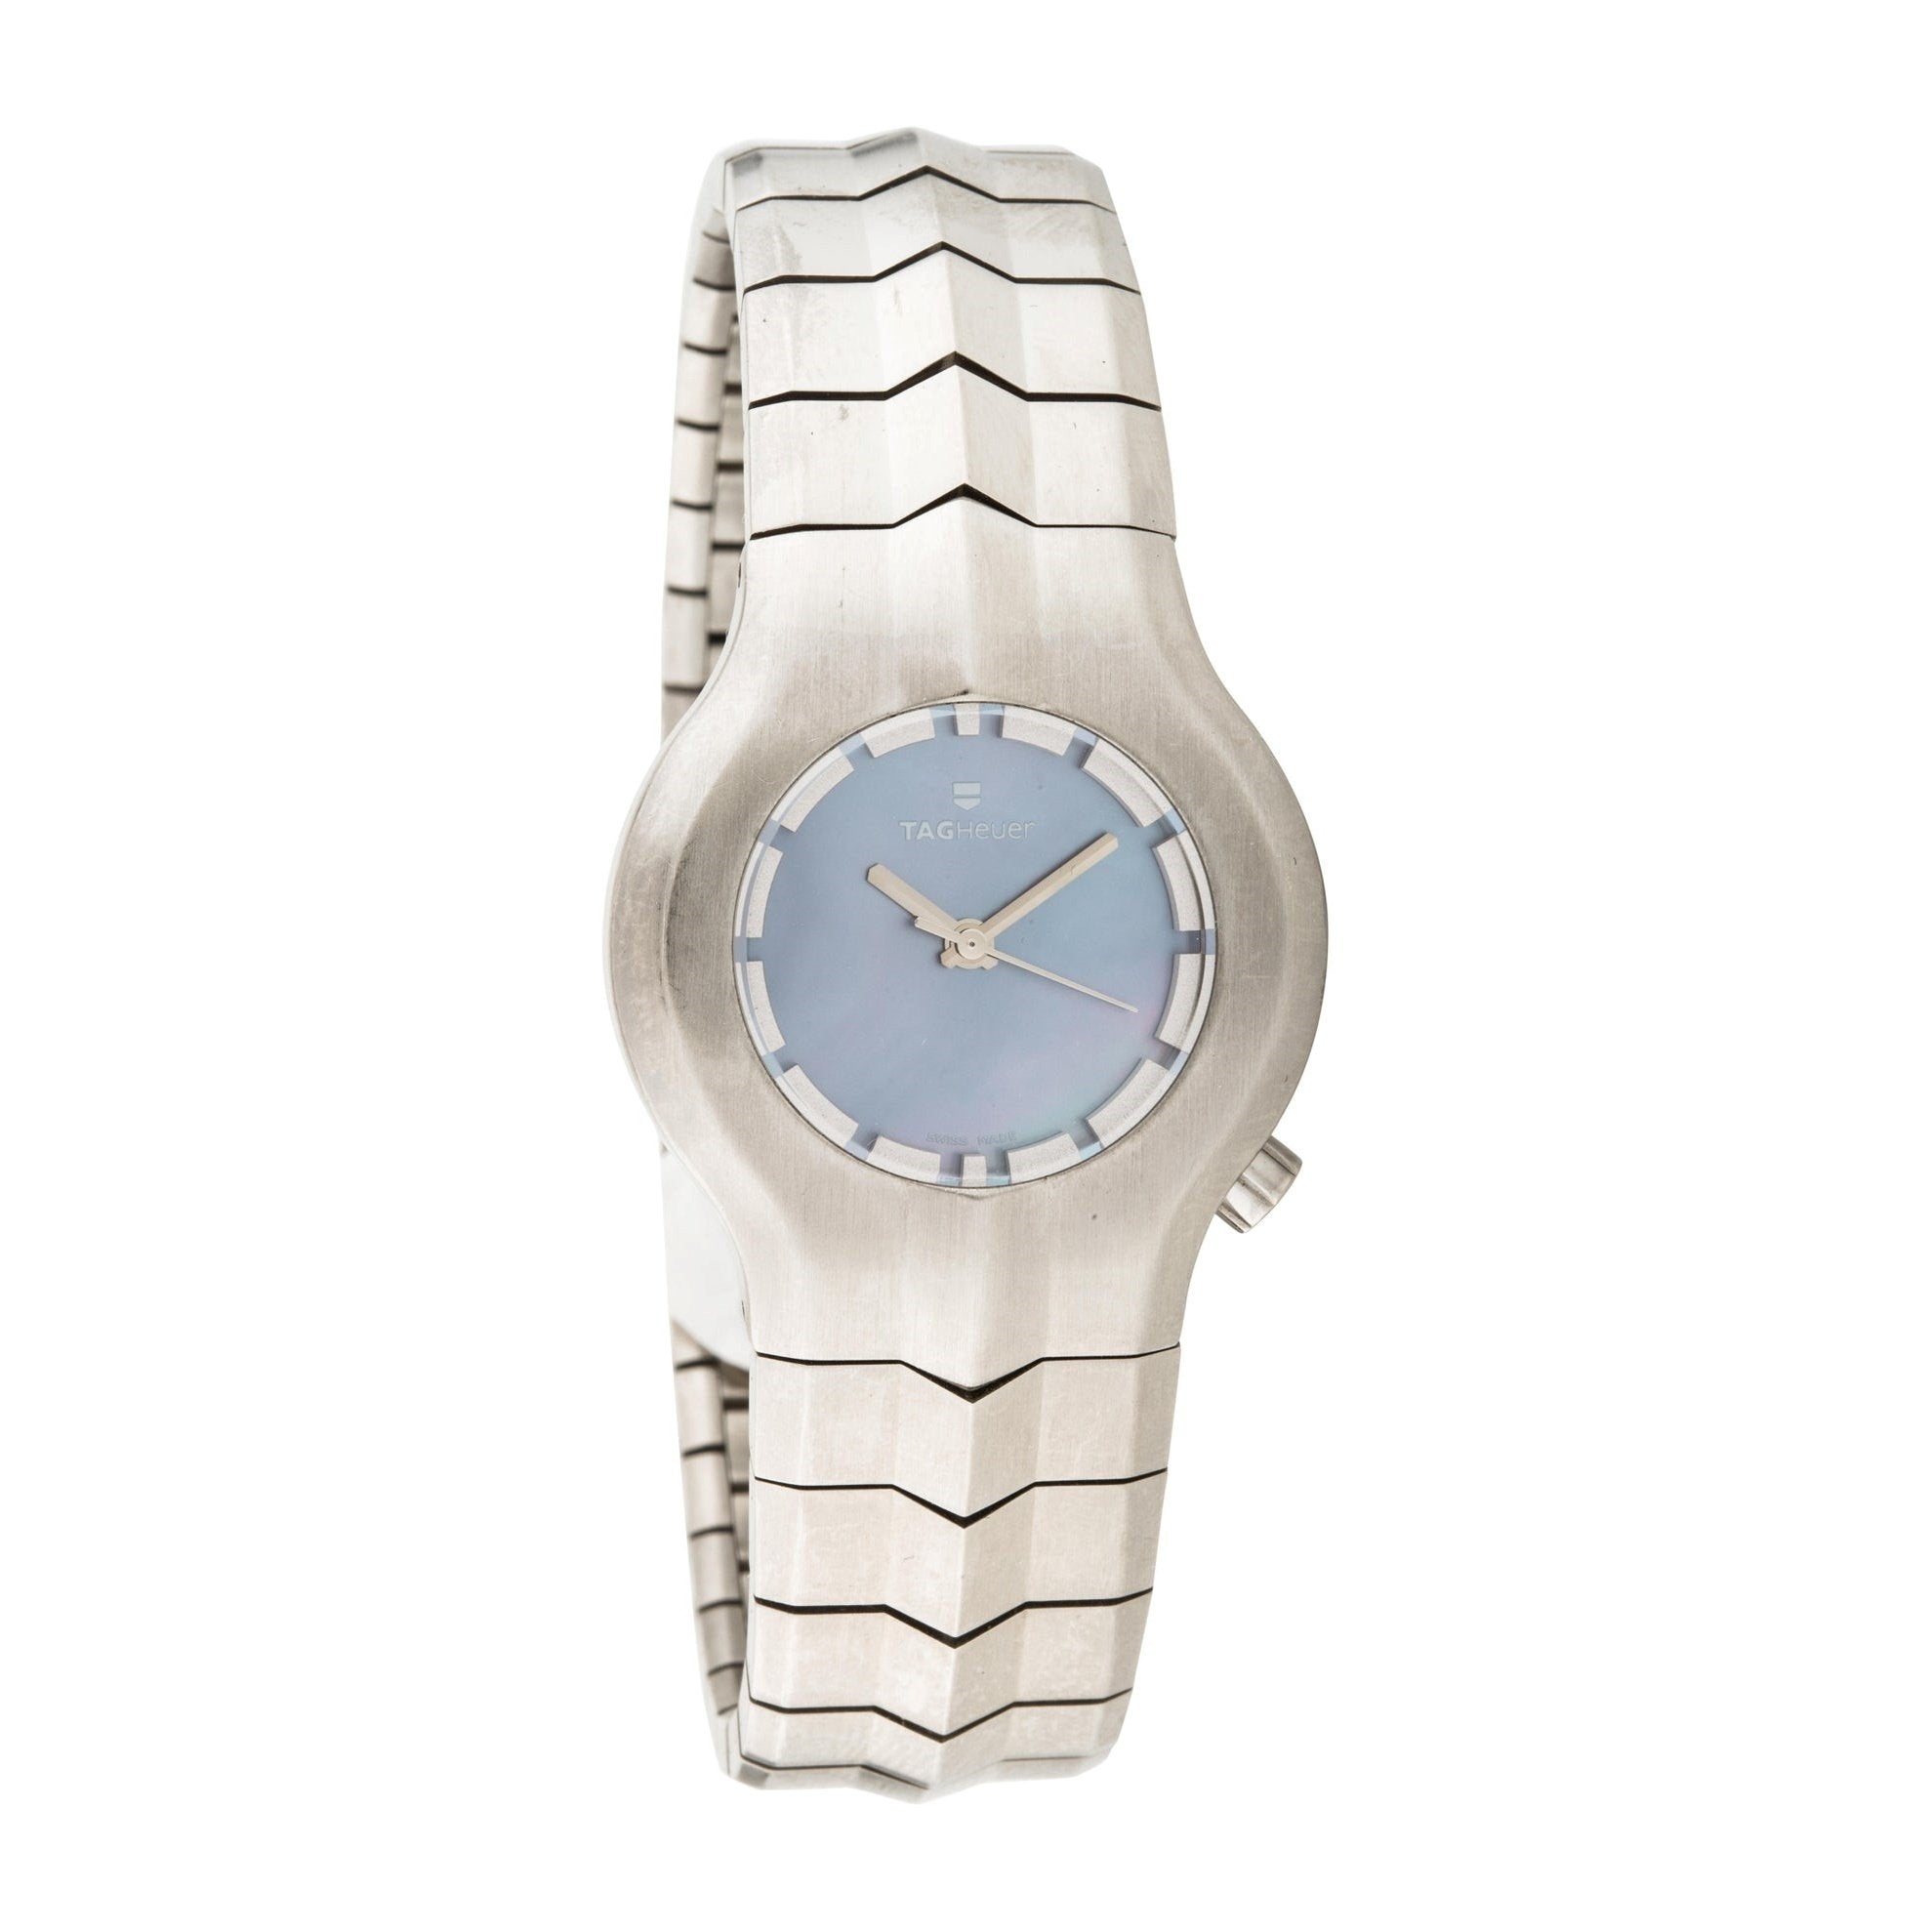 Tag Heuer Alter Ego Quartz Mother of Pearl Dial Women's Watch WP1312.BA0750